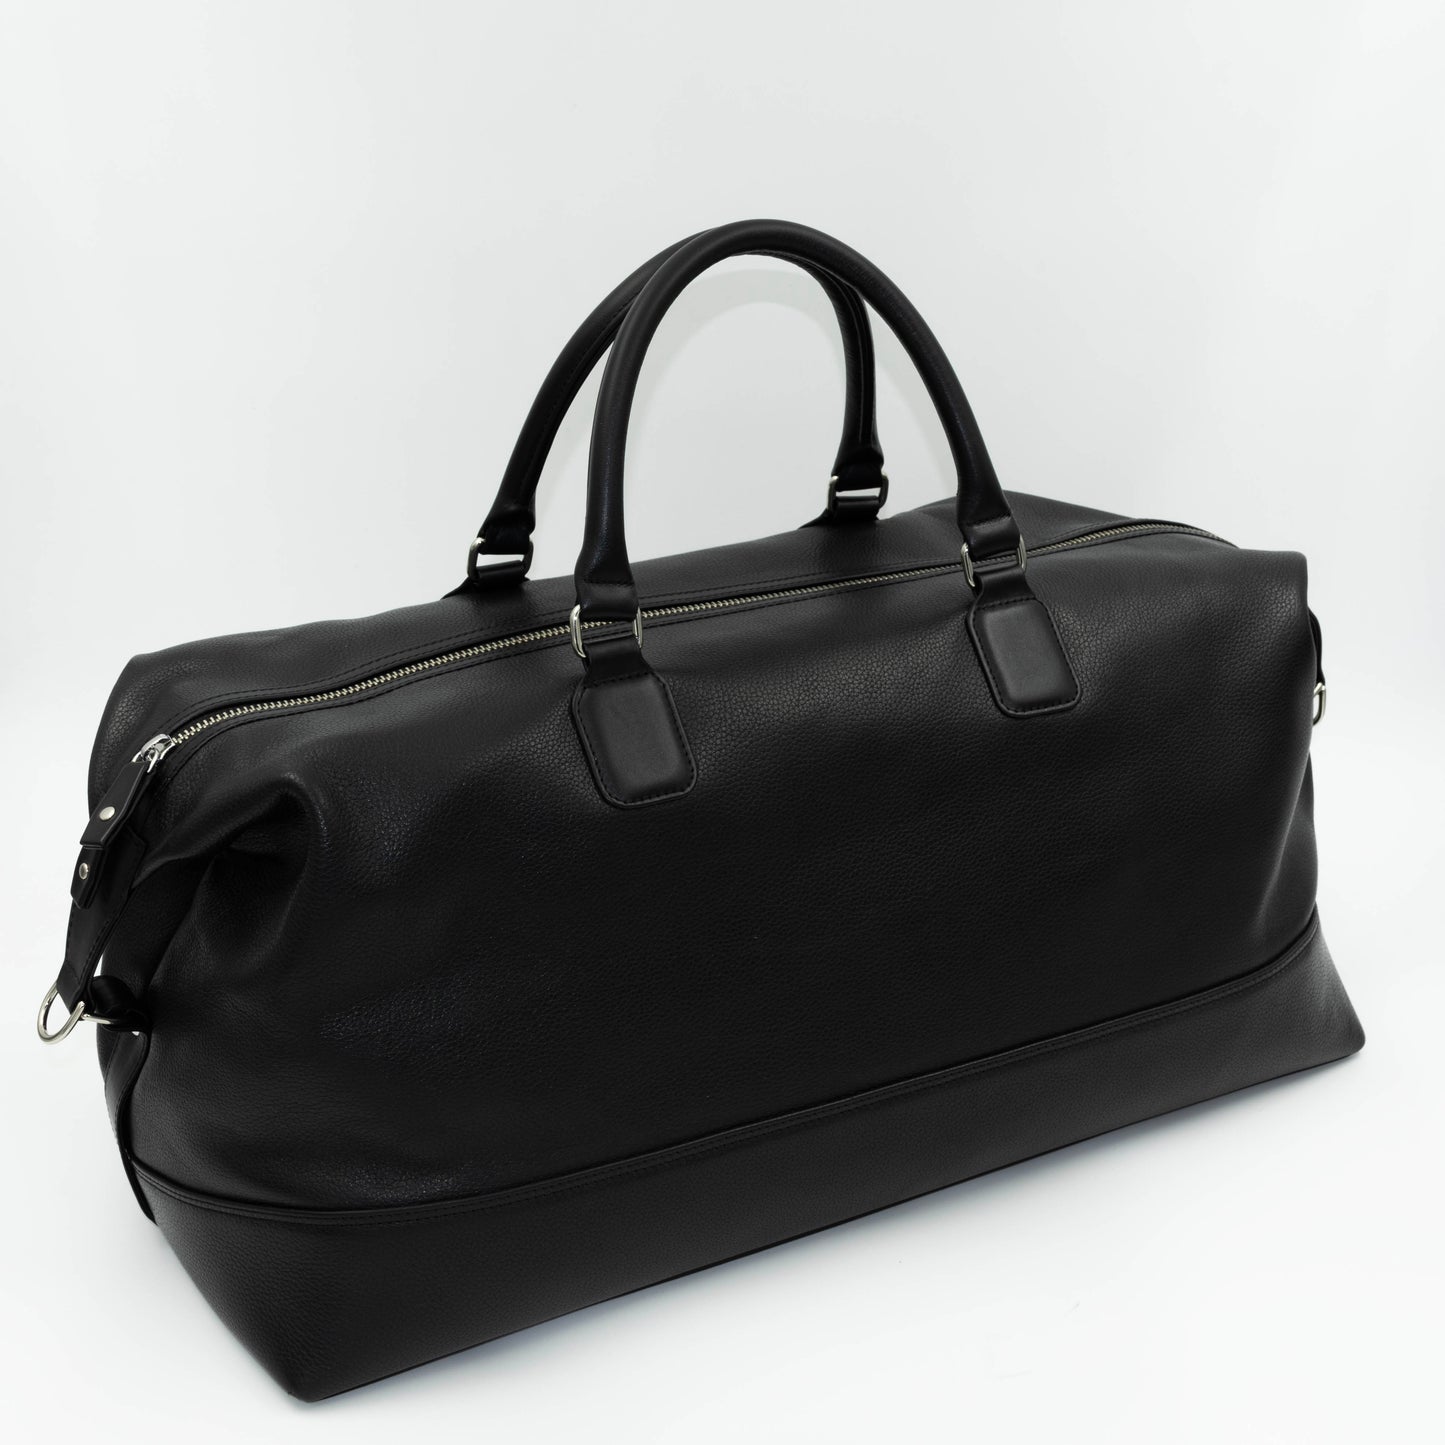 The Overnighter bag is made from full grain leather that is embossed with a pebbled grain texture